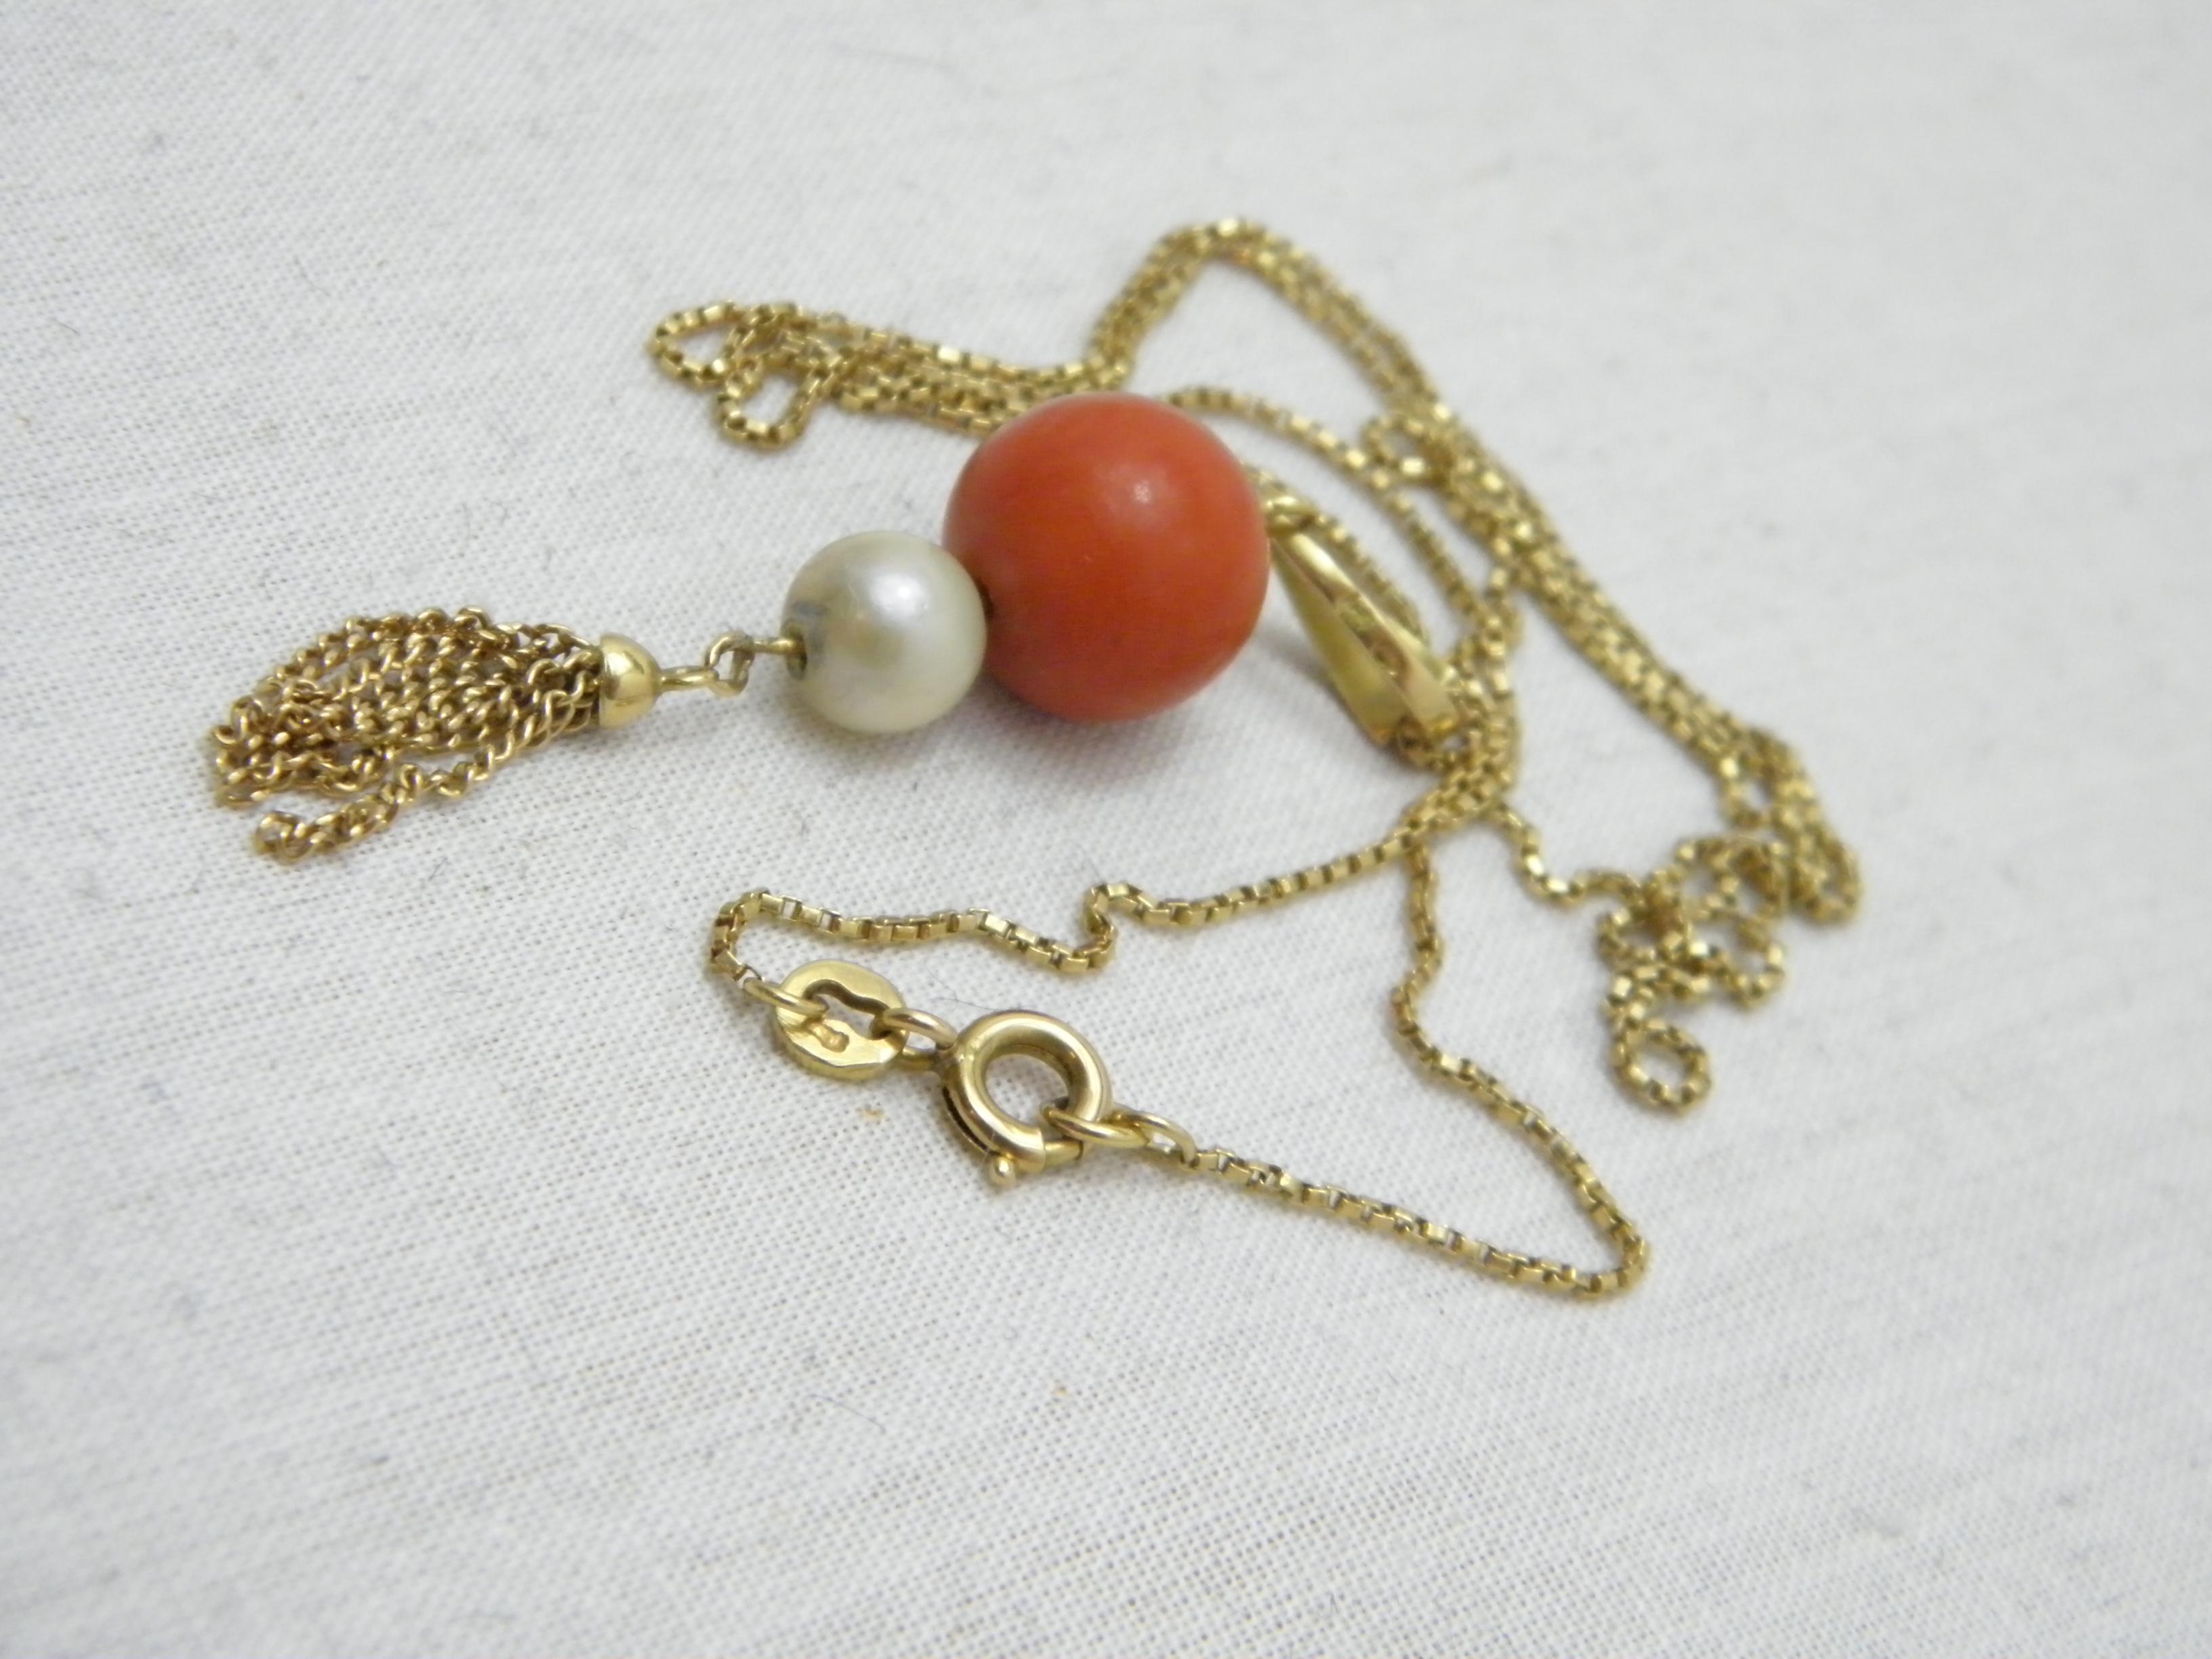 Antique 18ct Gold Coral Pearl Pendant Necklace Box Chain 750 Purity 21 Inch 2